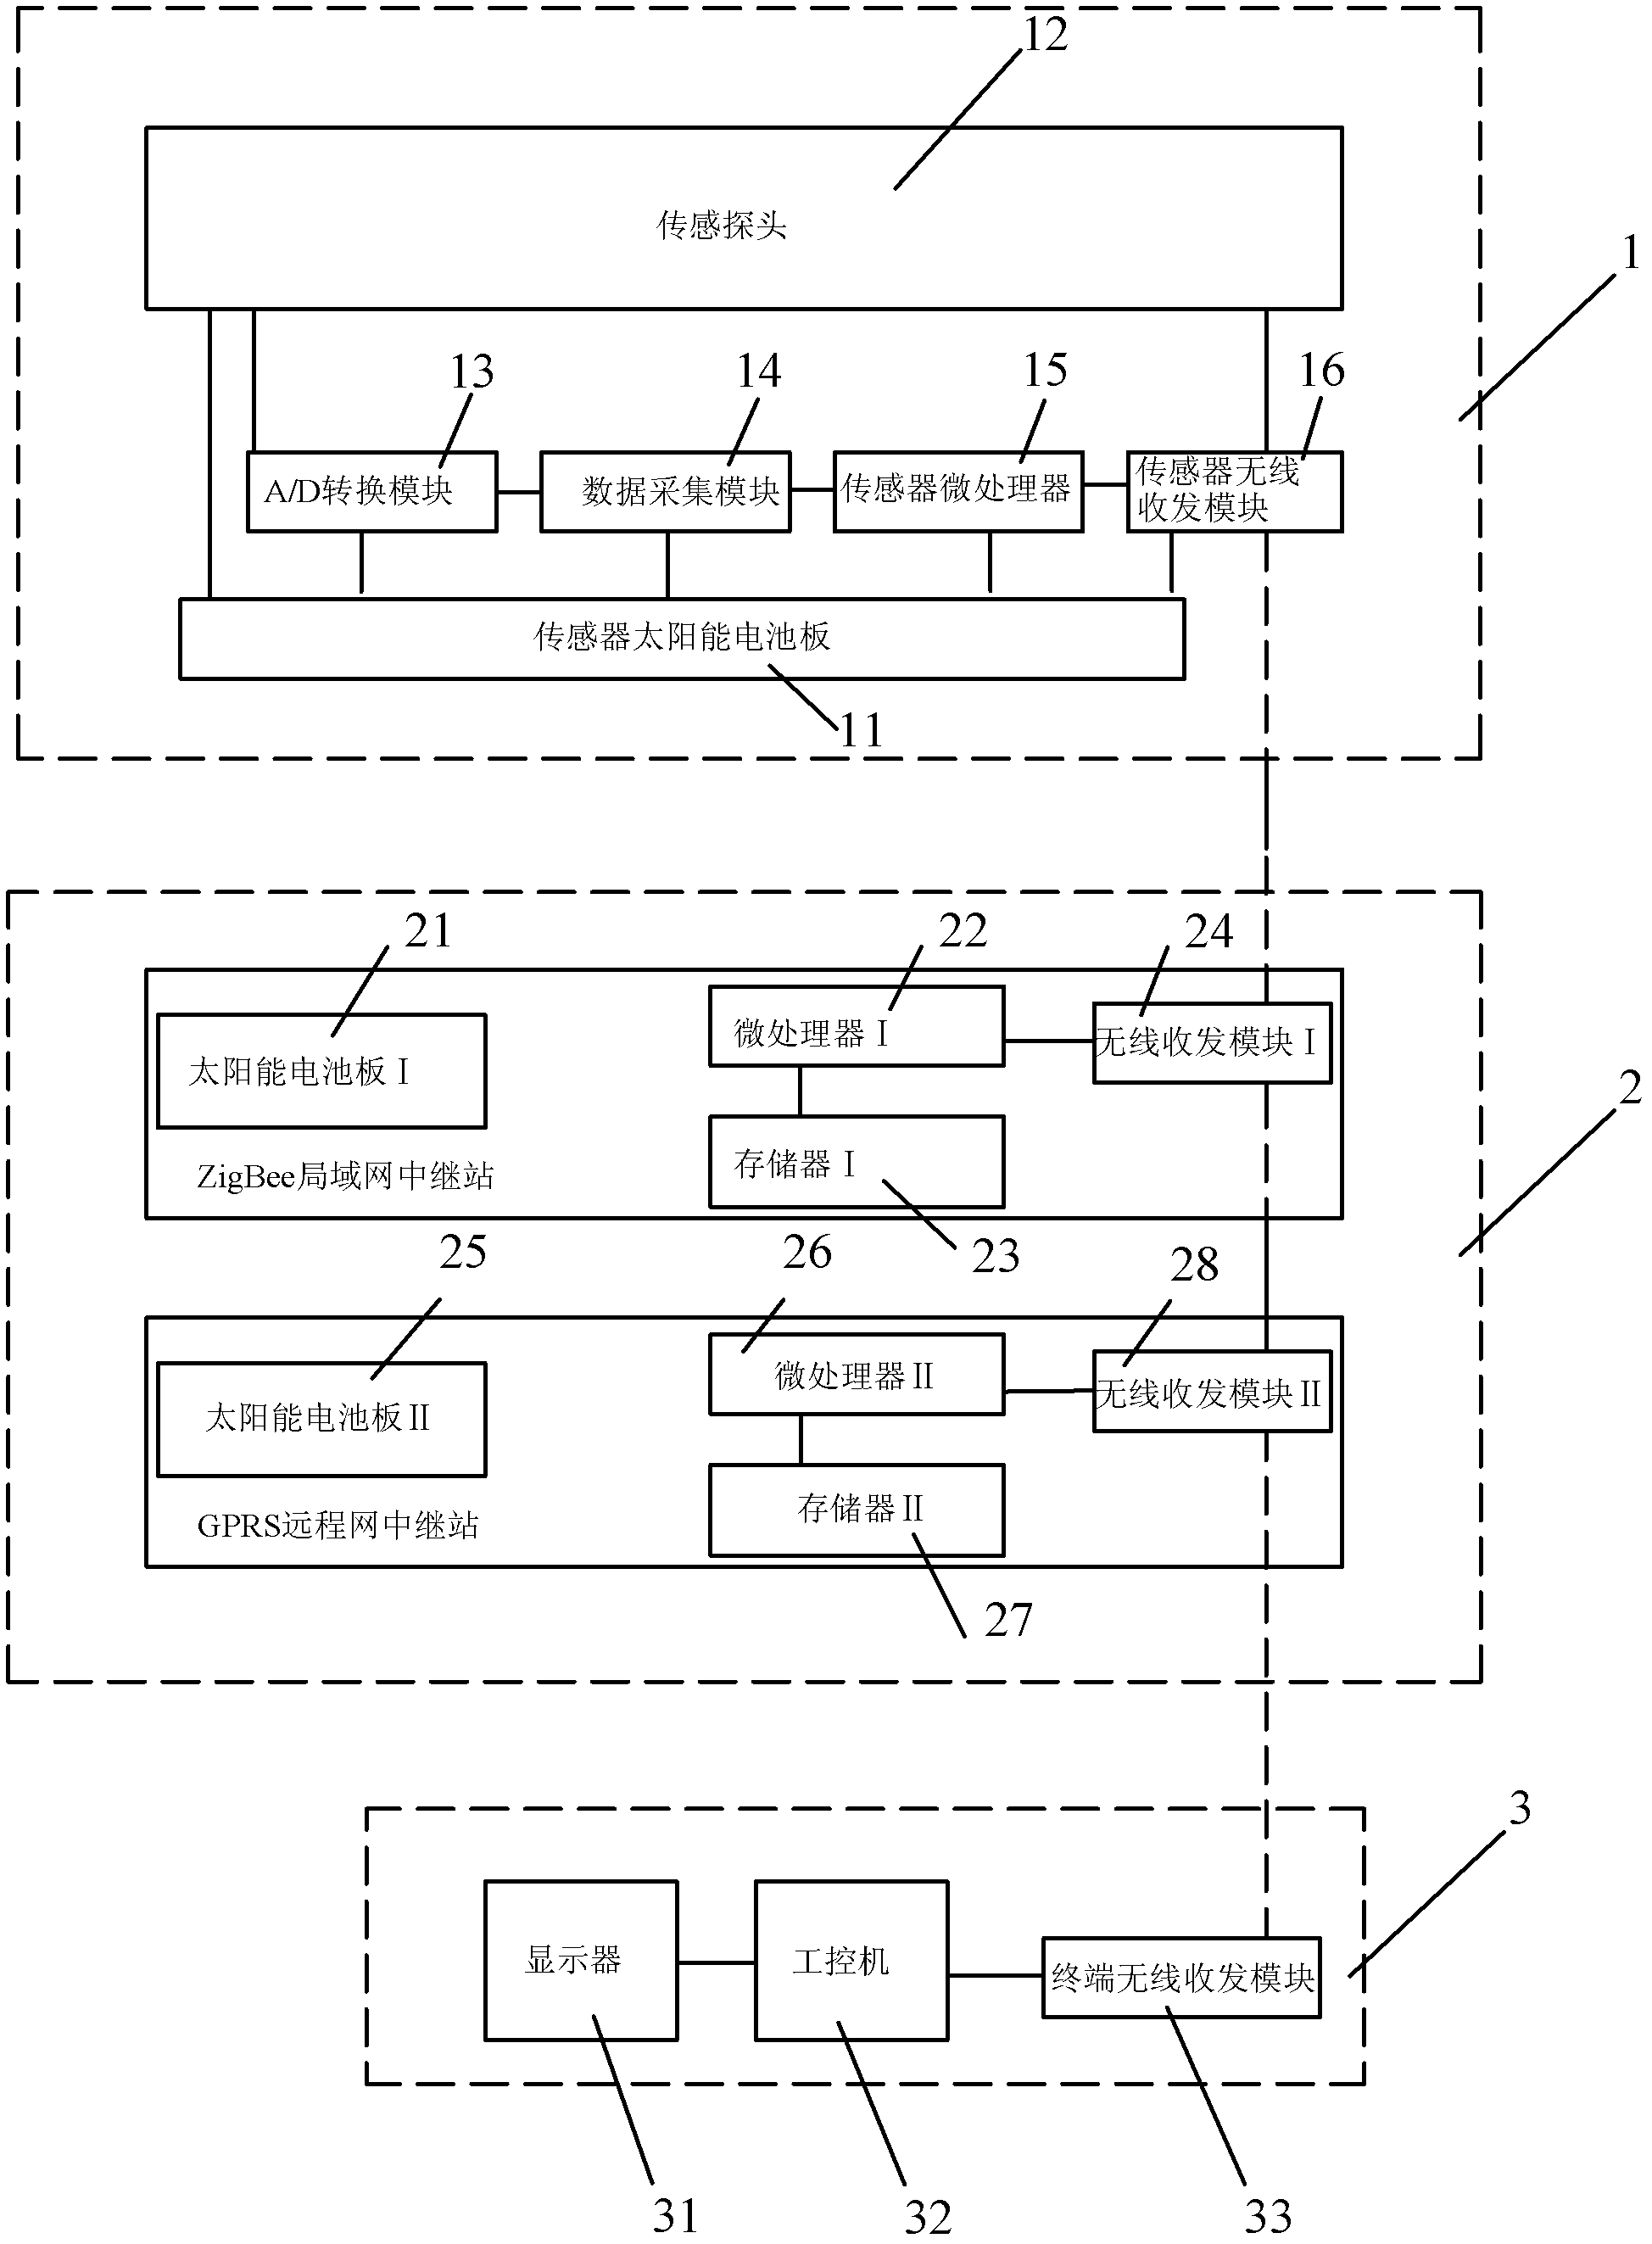 Multi-parameter integrated COD (Chemical Oxygen Demand) water quality monitoring system and monitoring method thereof